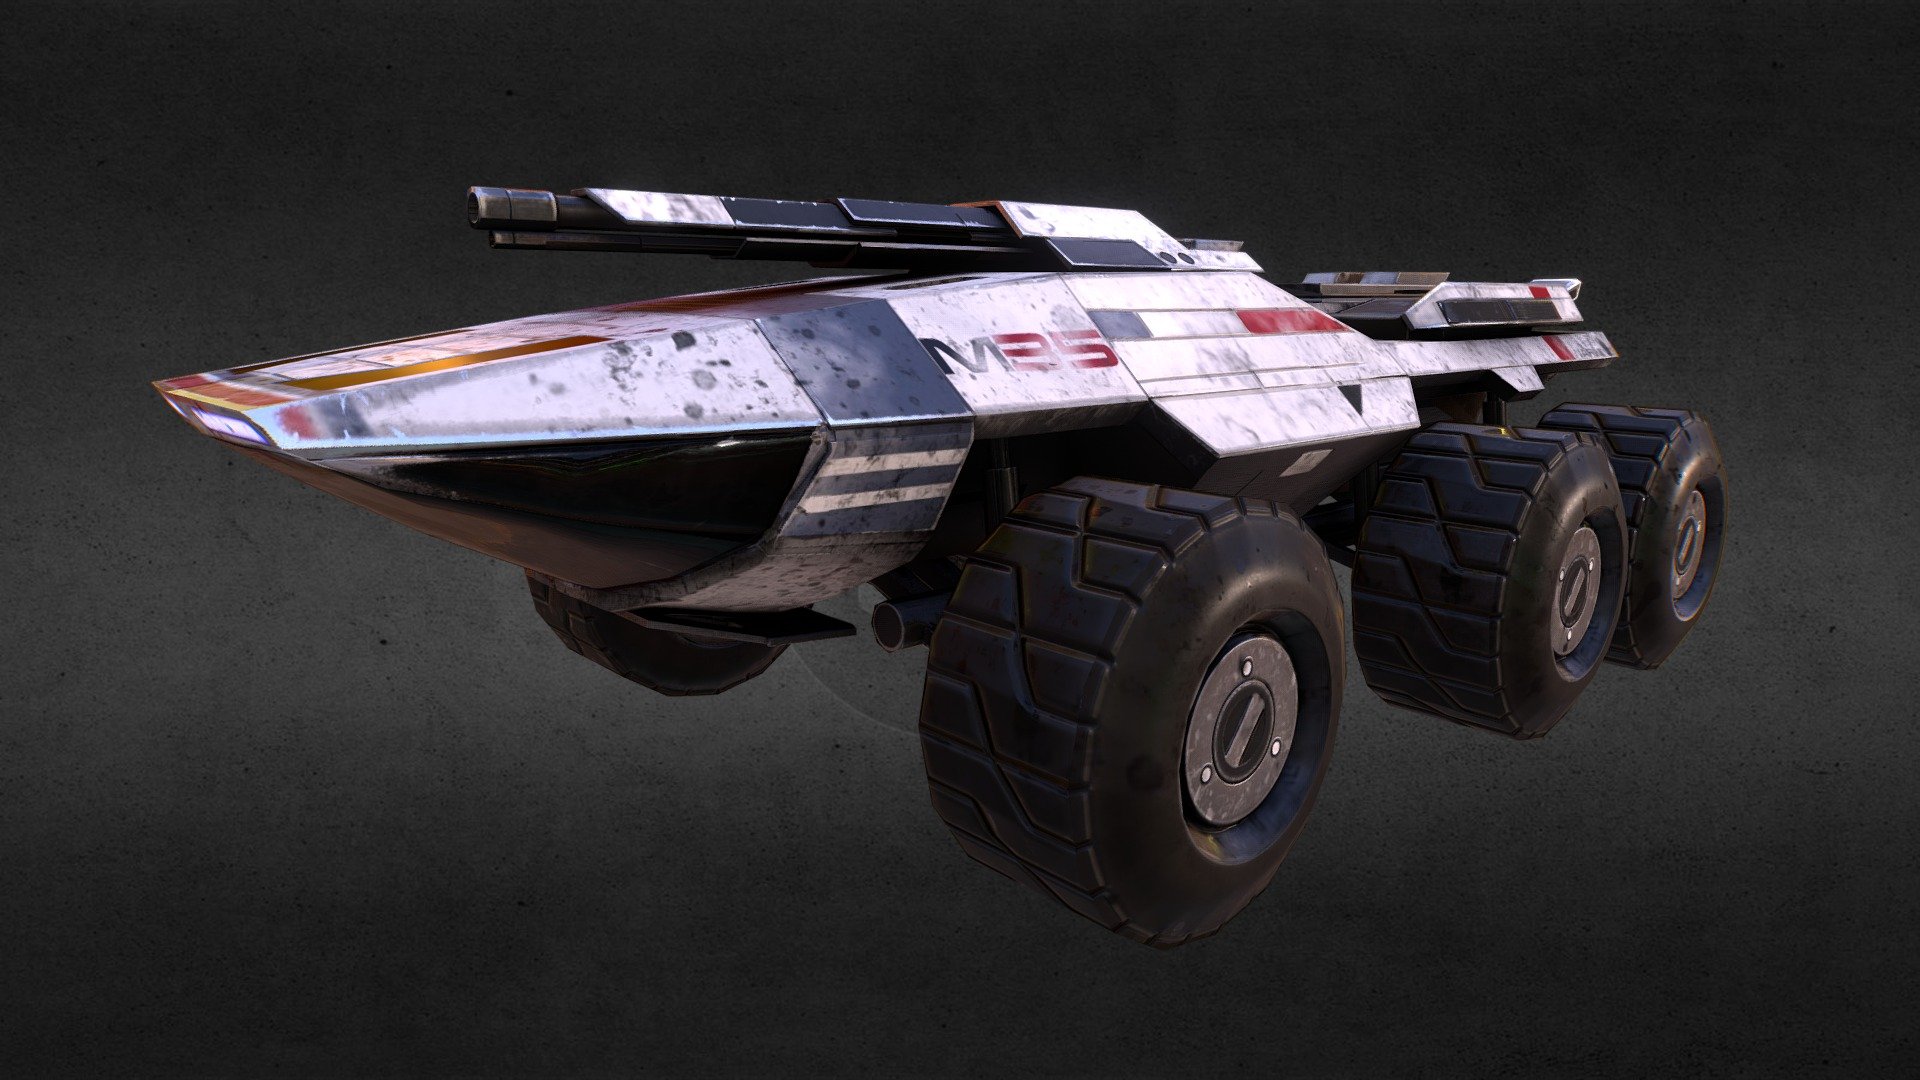 A Mako M35 vehicle from the first Mass Effect game. 